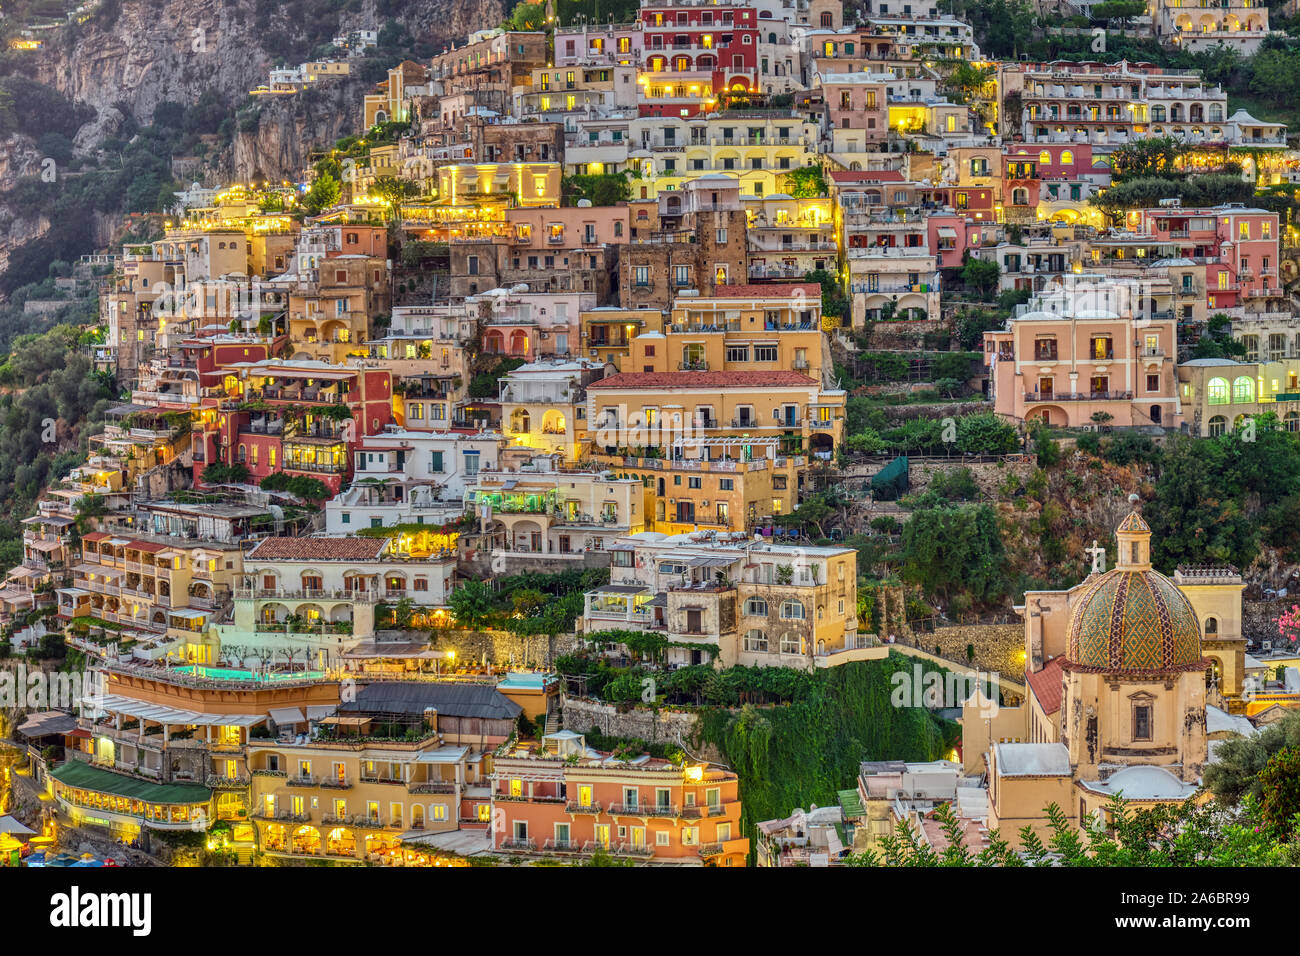 The houses of Positano in Italy at dusk Stock Photo